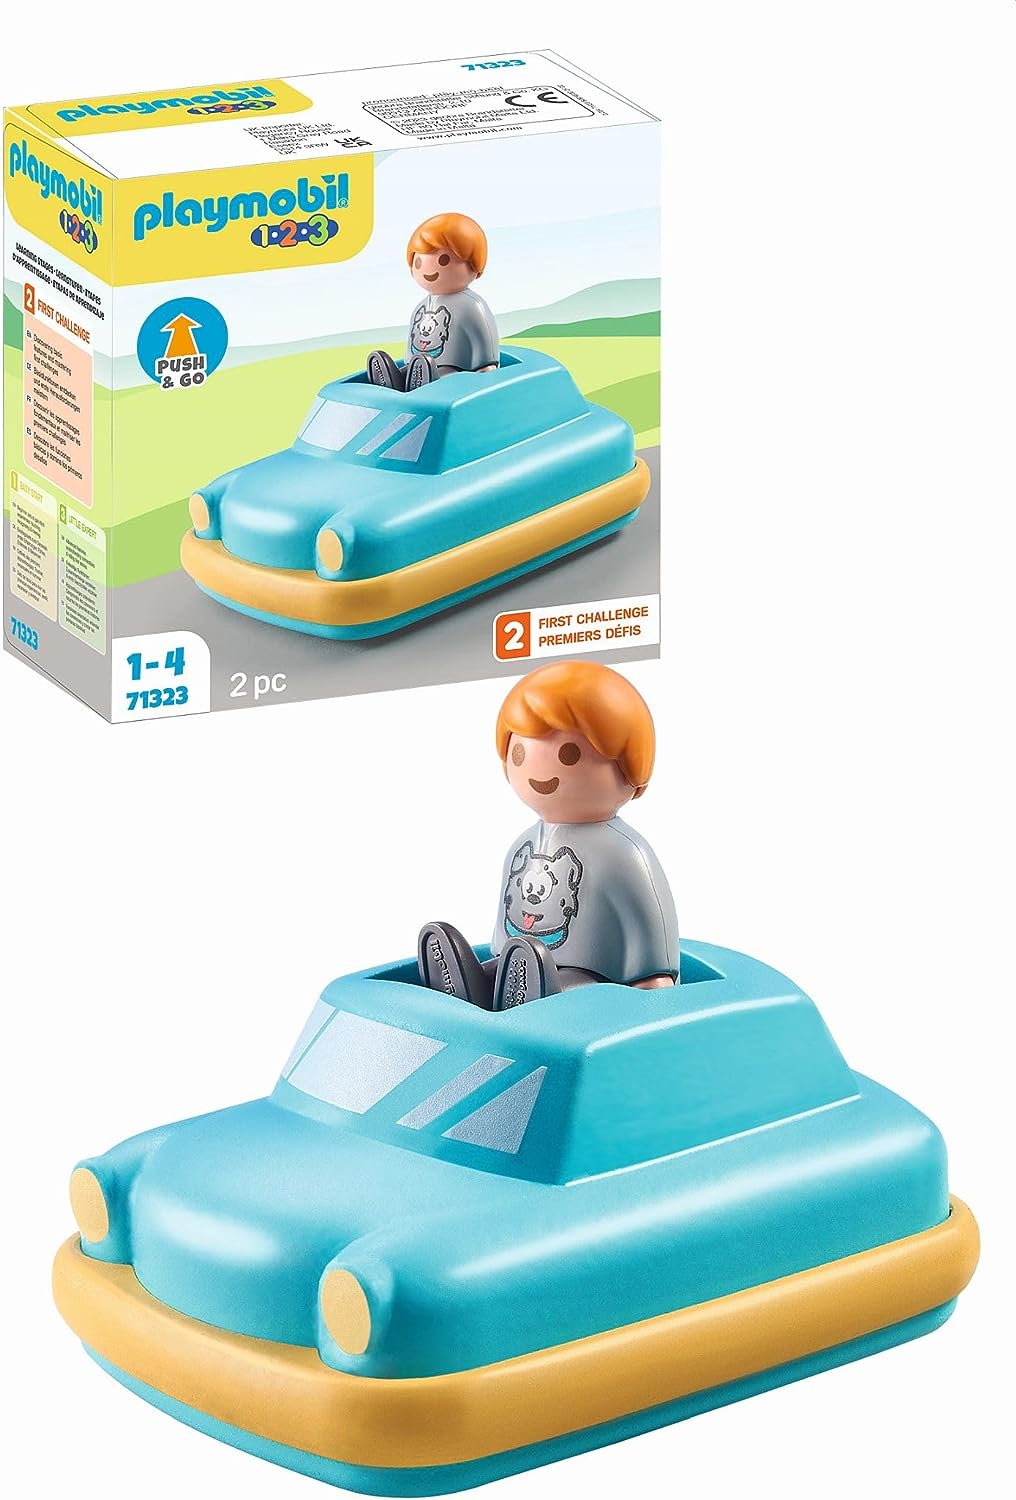 PLAYMOBIL 1.2.3 71323 Push & Go Car, Toy Car with Flywheel Motor, Educational Toy for Toddlers, Toy for Children from 12 Months